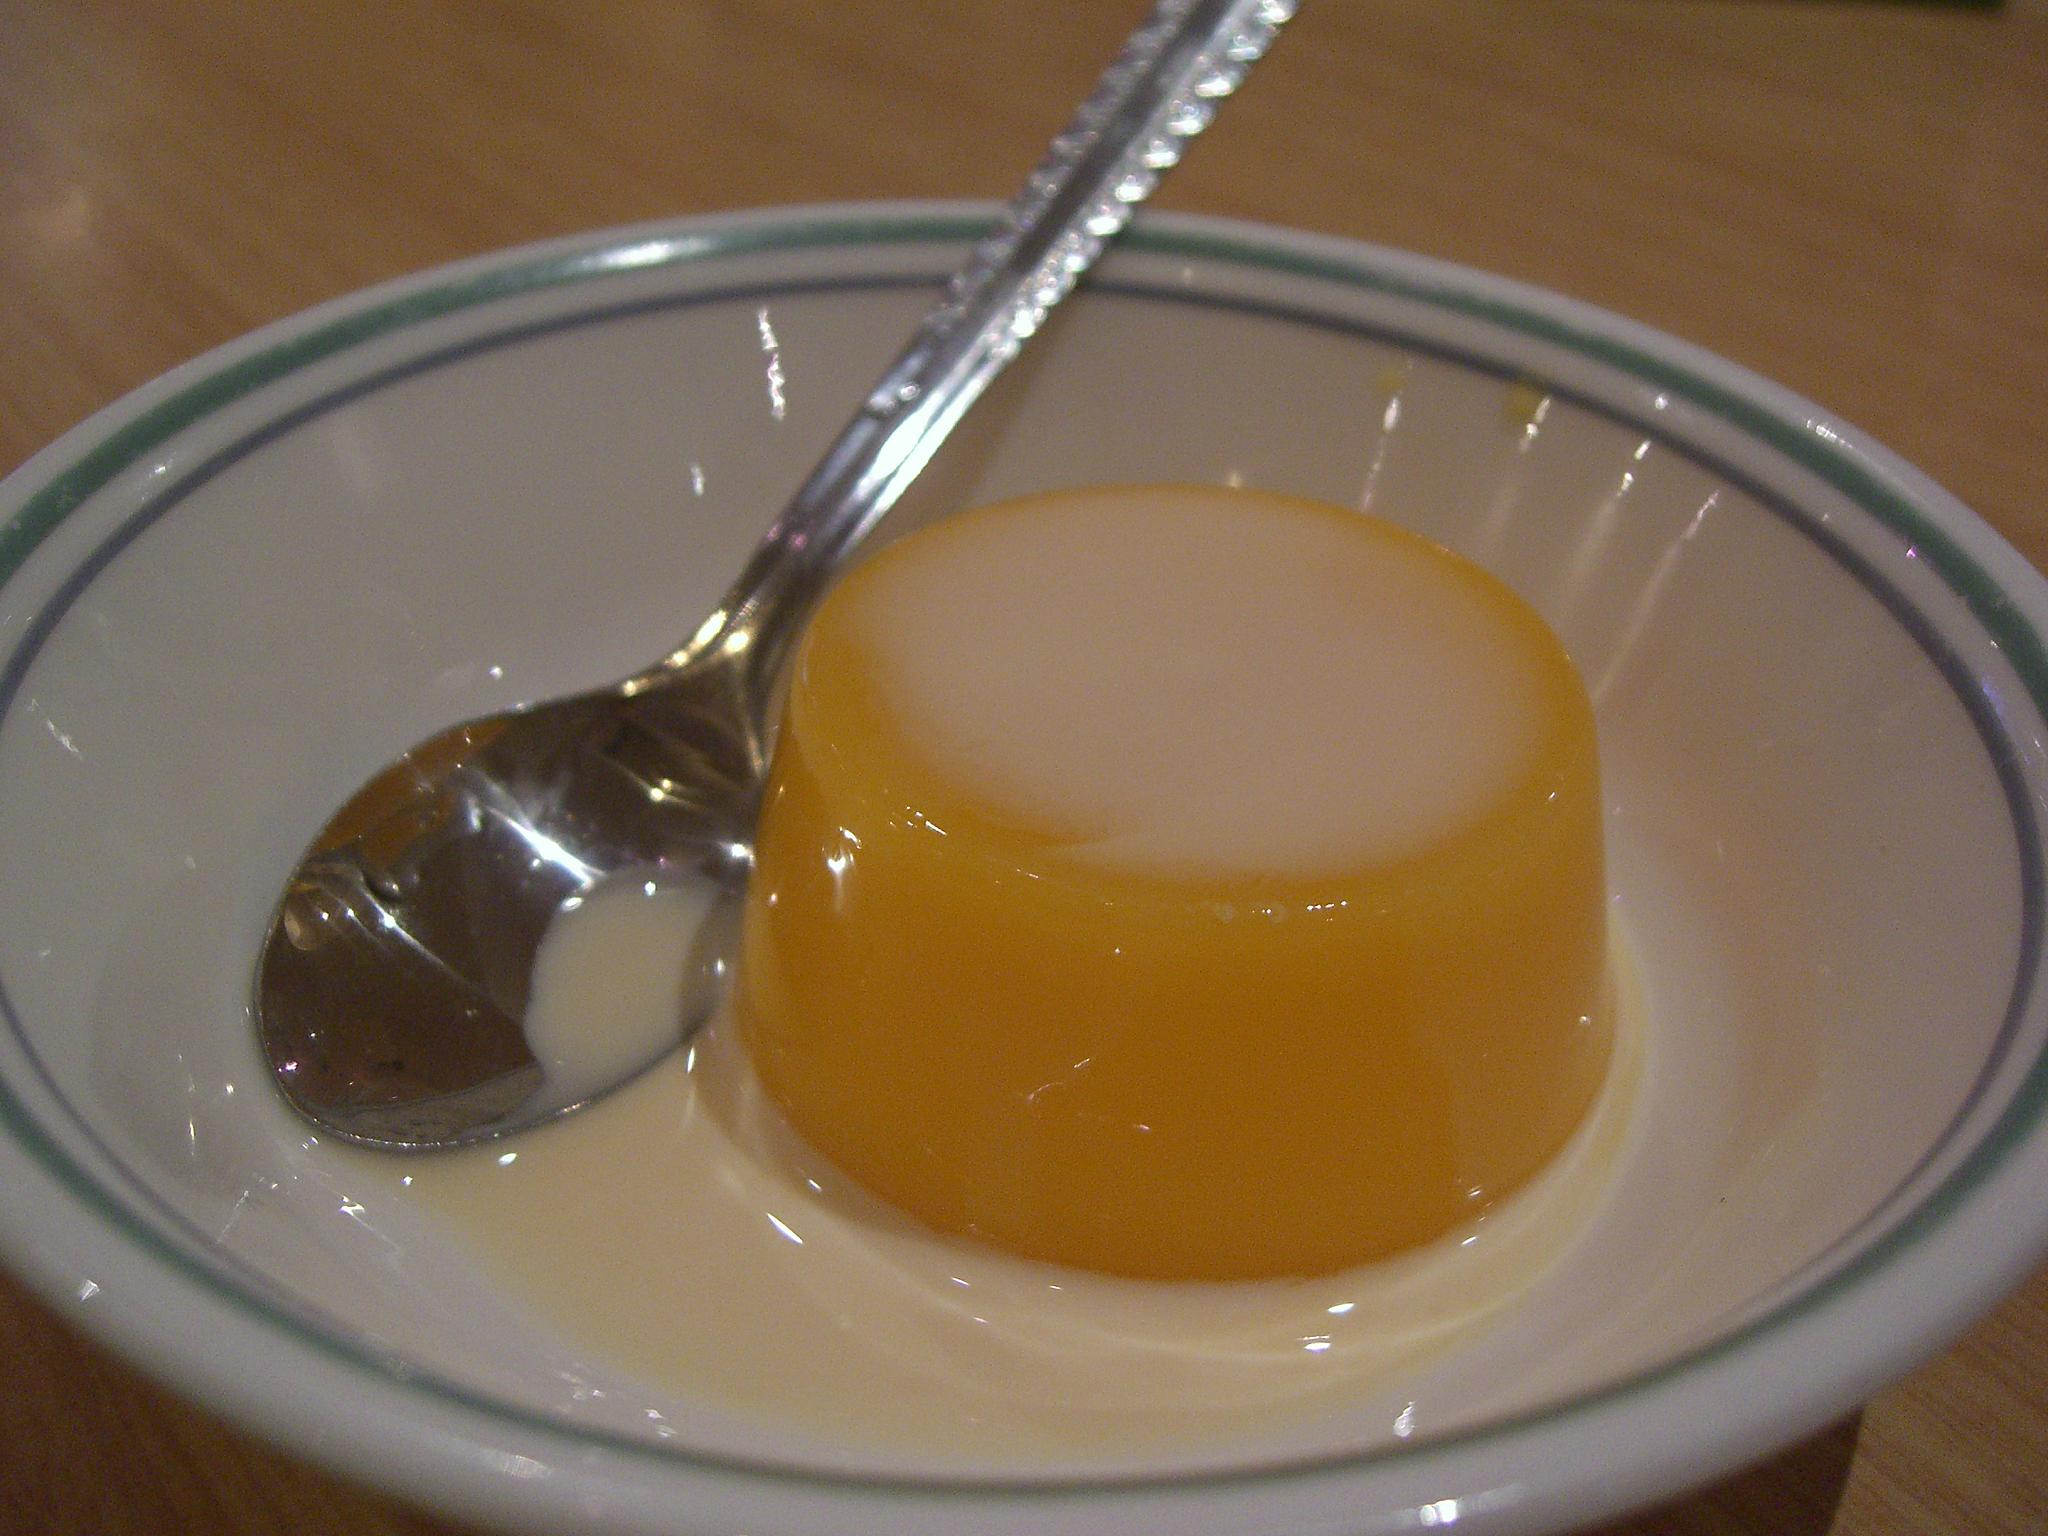 https://commons.wikimedia.org/wiki/File:Mango_pudding_by_avlxyz_in_Melbourne.jpg